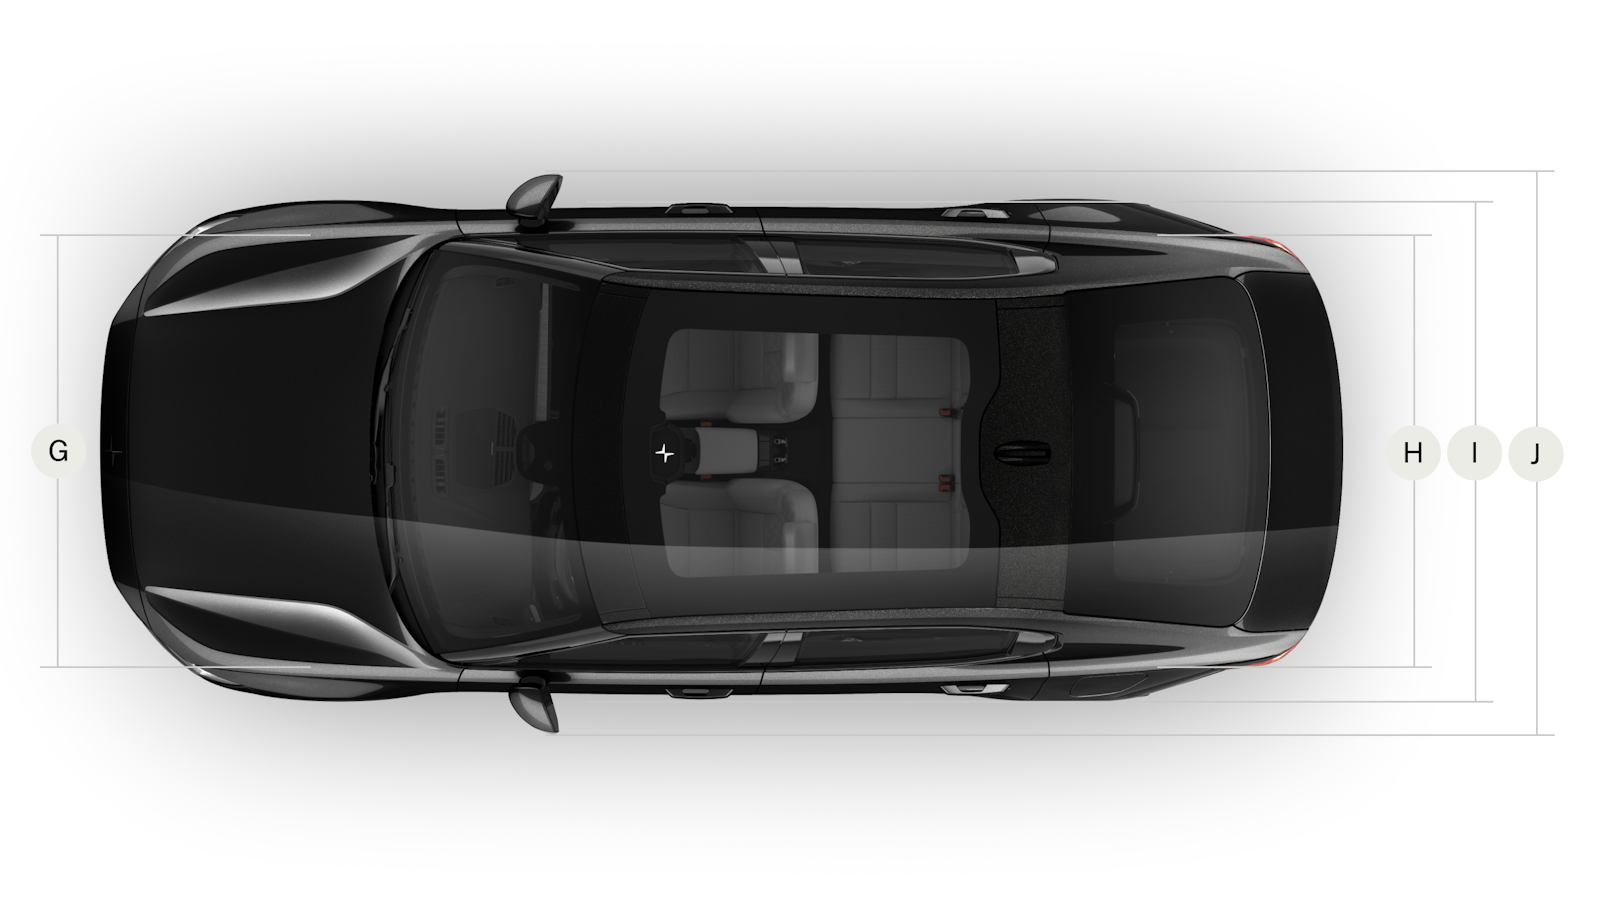 Bird view of the Polestar 2 with the dimensions seen from the top